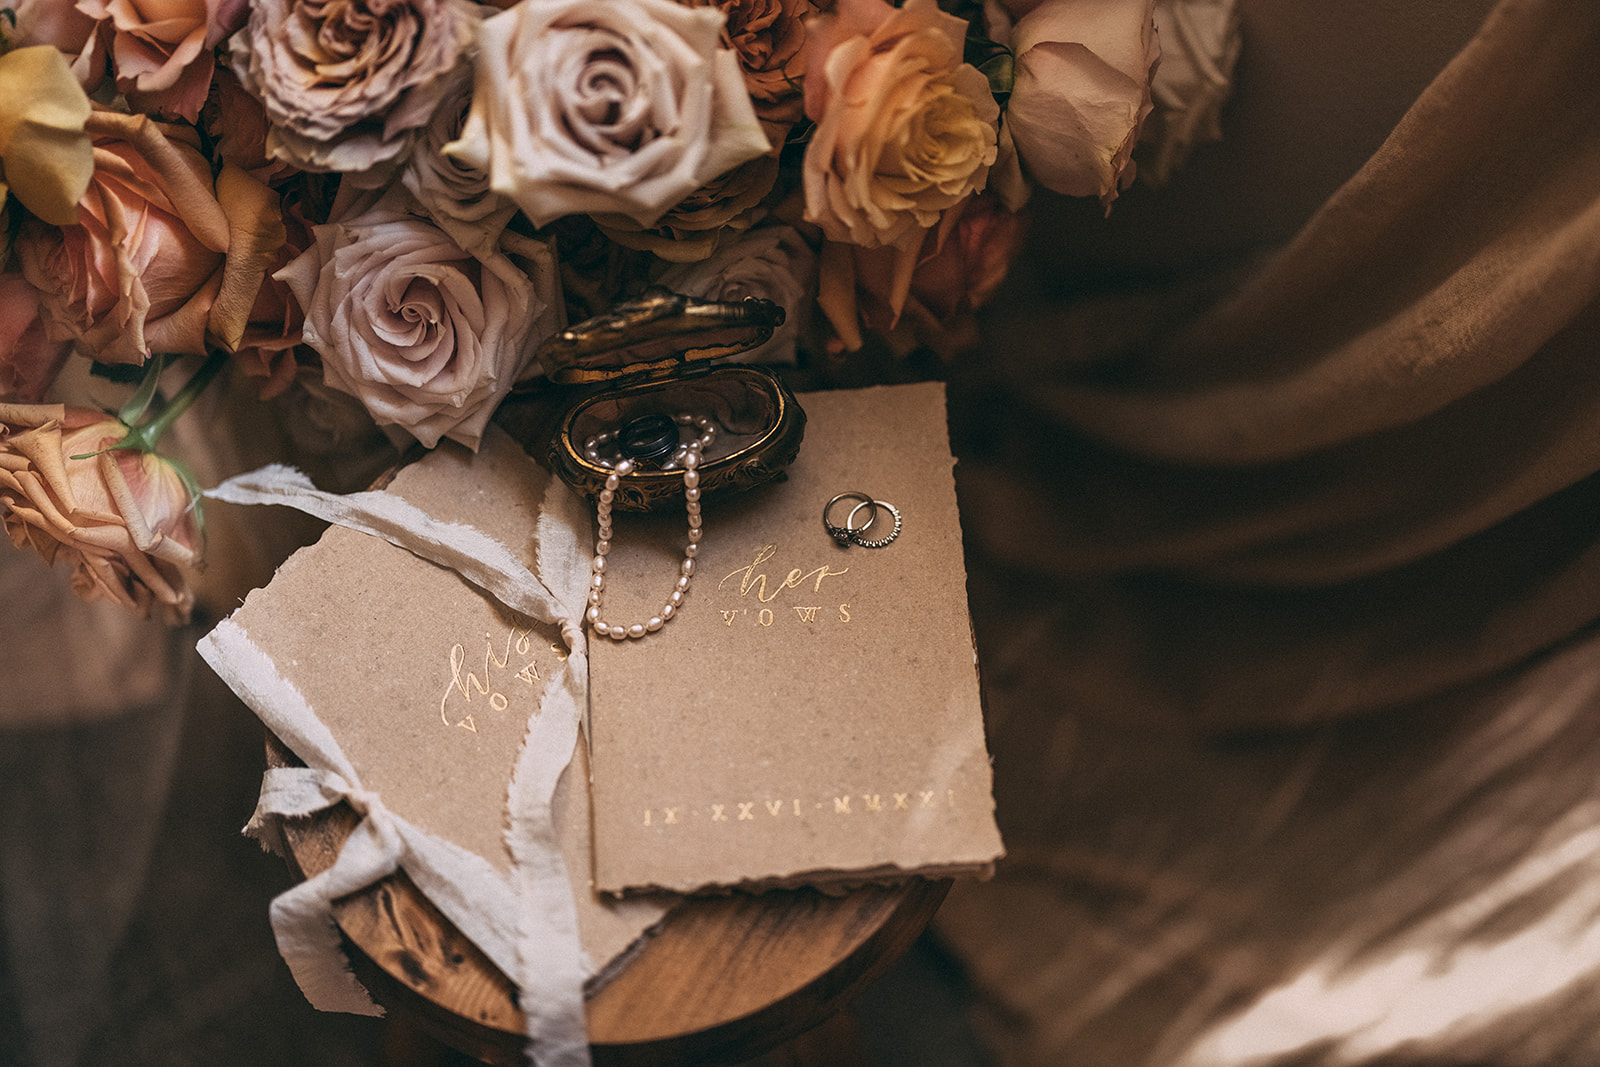 Autumnal wedding day details in neutral tones with vow booklets